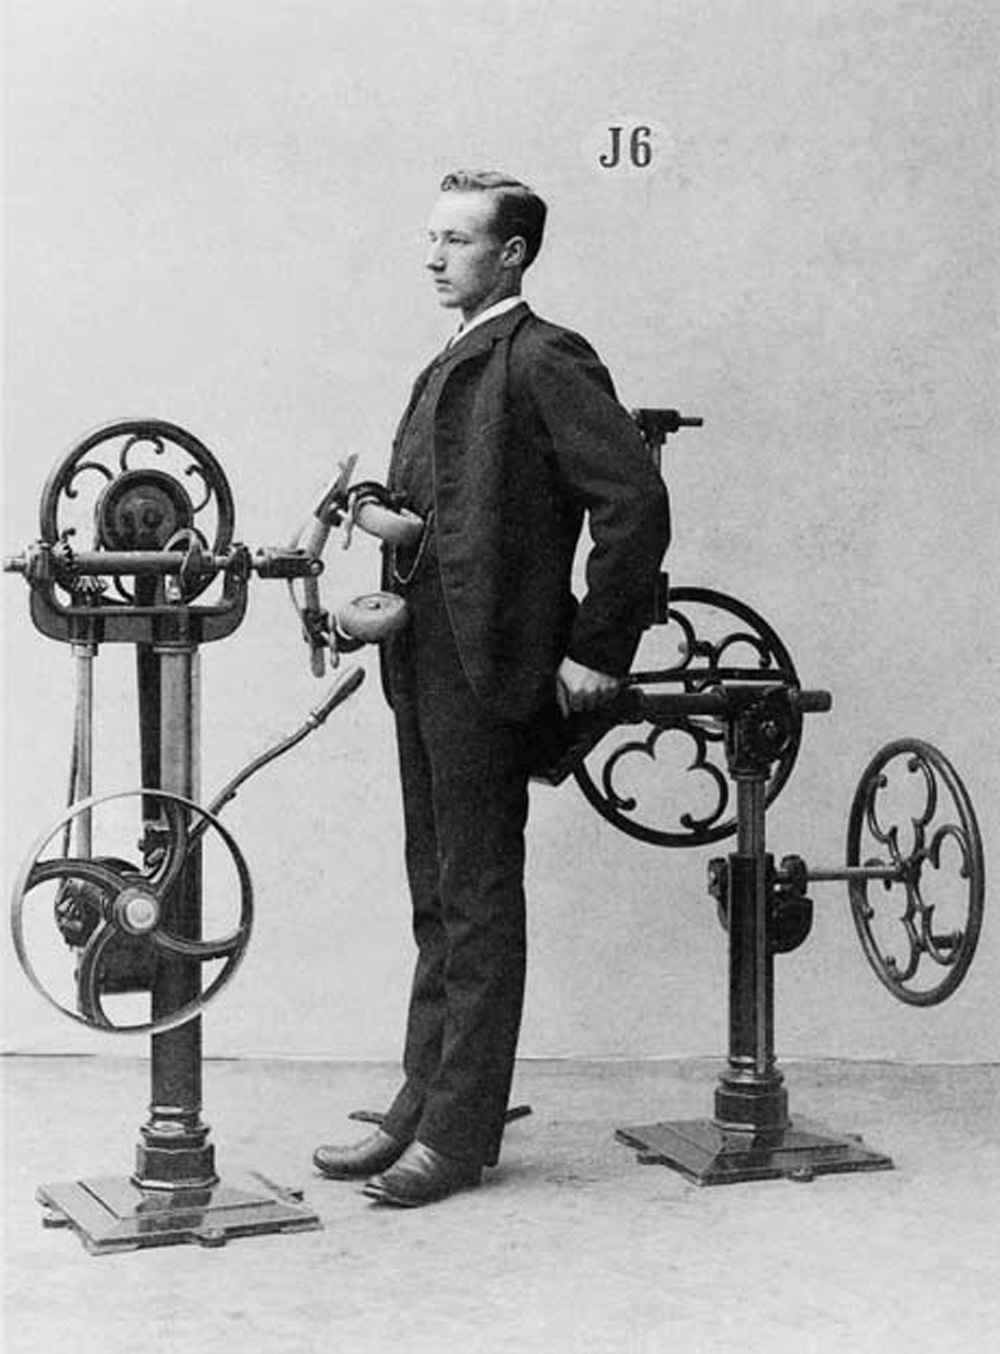 A nineteen-eighties photograph of a man in a suit standing in front of a Zander exercise machine, which is rolling his abdomen.